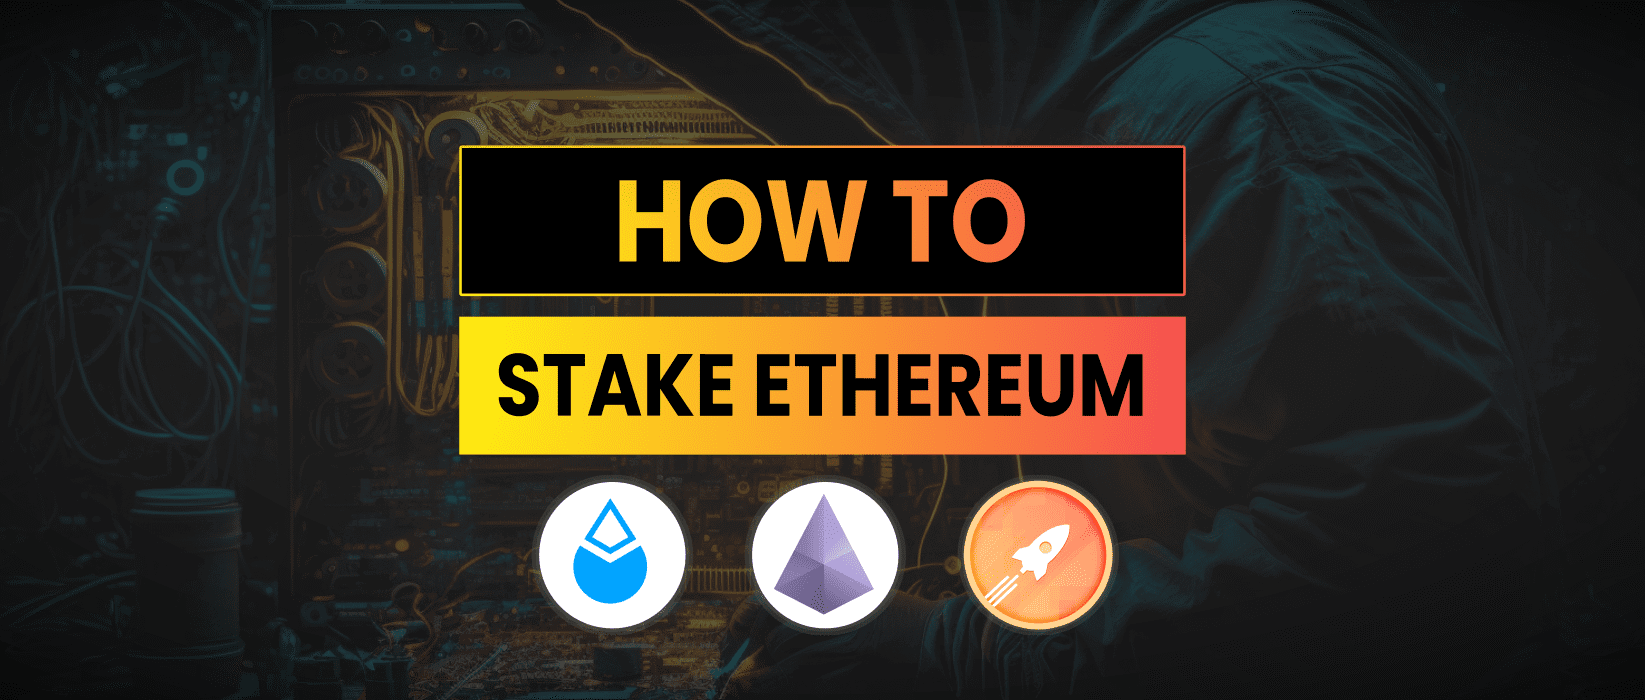 How To Stake Ethereum | Earn More Yield With Ethereum Staking 1